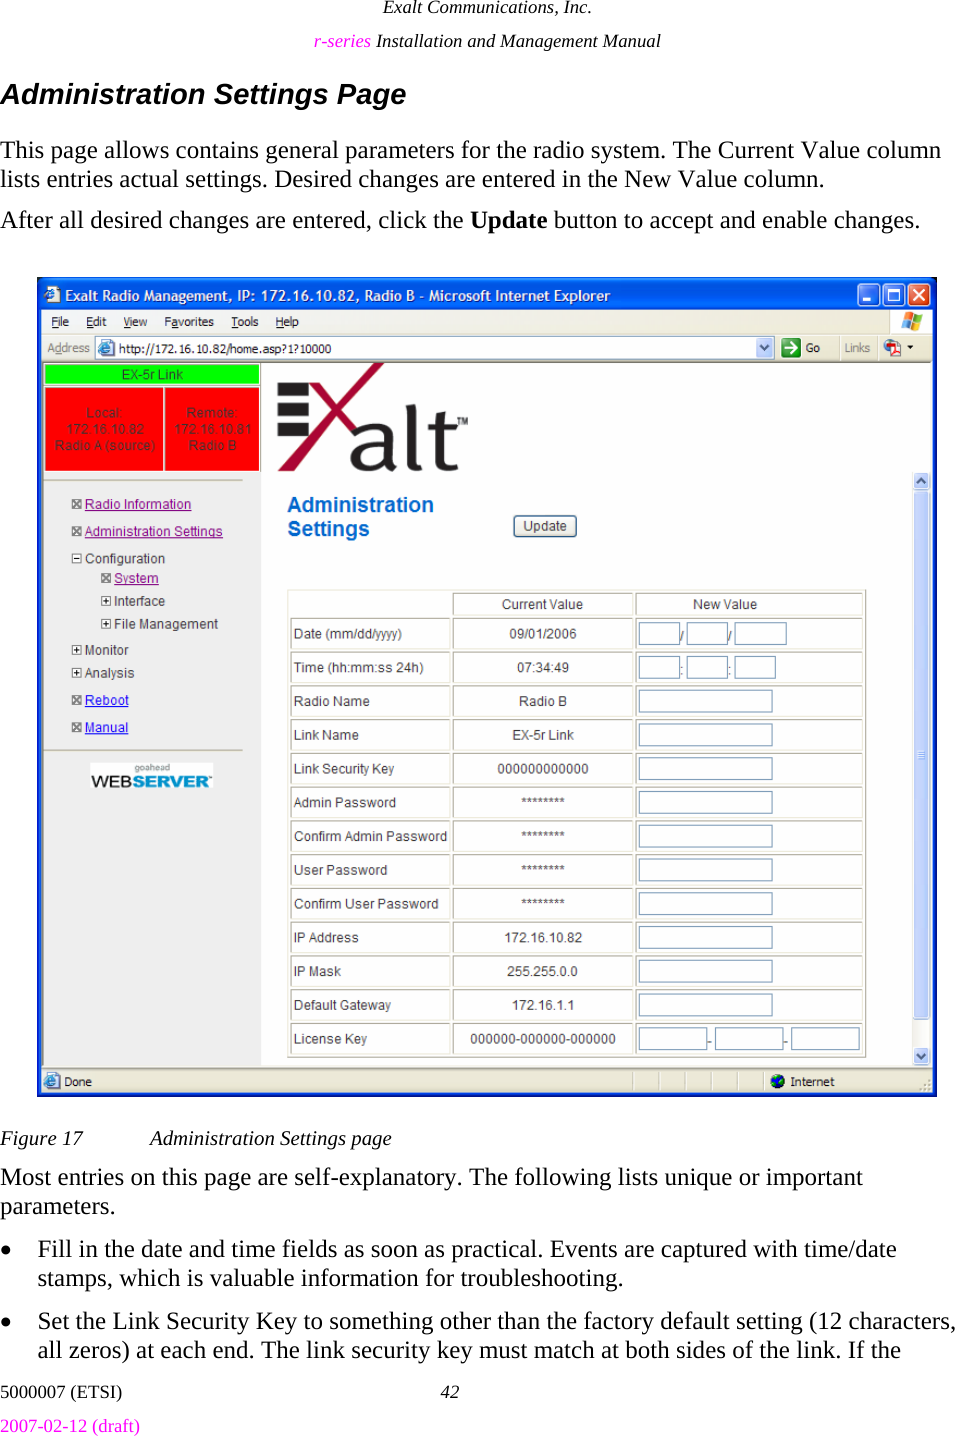 Exalt Communications, Inc. r-series Installation and Management Manual 5000007 (ETSI)  42 2007-02-12 (draft)  Administration Settings Page This page allows contains general parameters for the radio system. The Current Value column lists entries actual settings. Desired changes are entered in the New Value column. After all desired changes are entered, click the Update button to accept and enable changes.  Figure 17  Administration Settings page Most entries on this page are self-explanatory. The following lists unique or important parameters. • Fill in the date and time fields as soon as practical. Events are captured with time/date stamps, which is valuable information for troubleshooting. • Set the Link Security Key to something other than the factory default setting (12 characters, all zeros) at each end. The link security key must match at both sides of the link. If the 